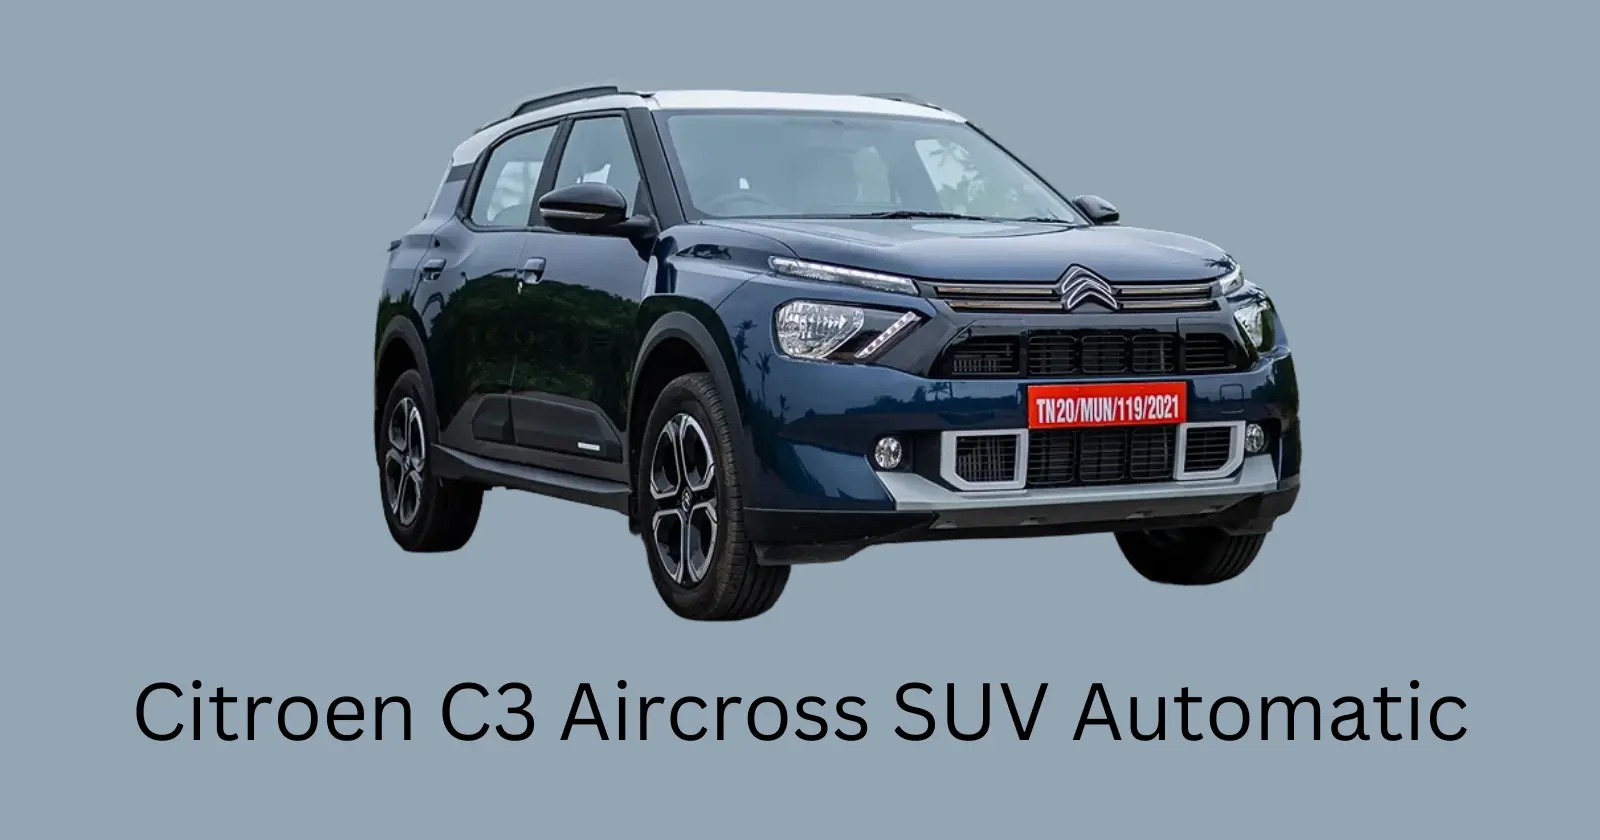 Citroen C3 Aircross SUV Automatic Variants Set to Hit Indian Roads: Here’s All You Need to Know